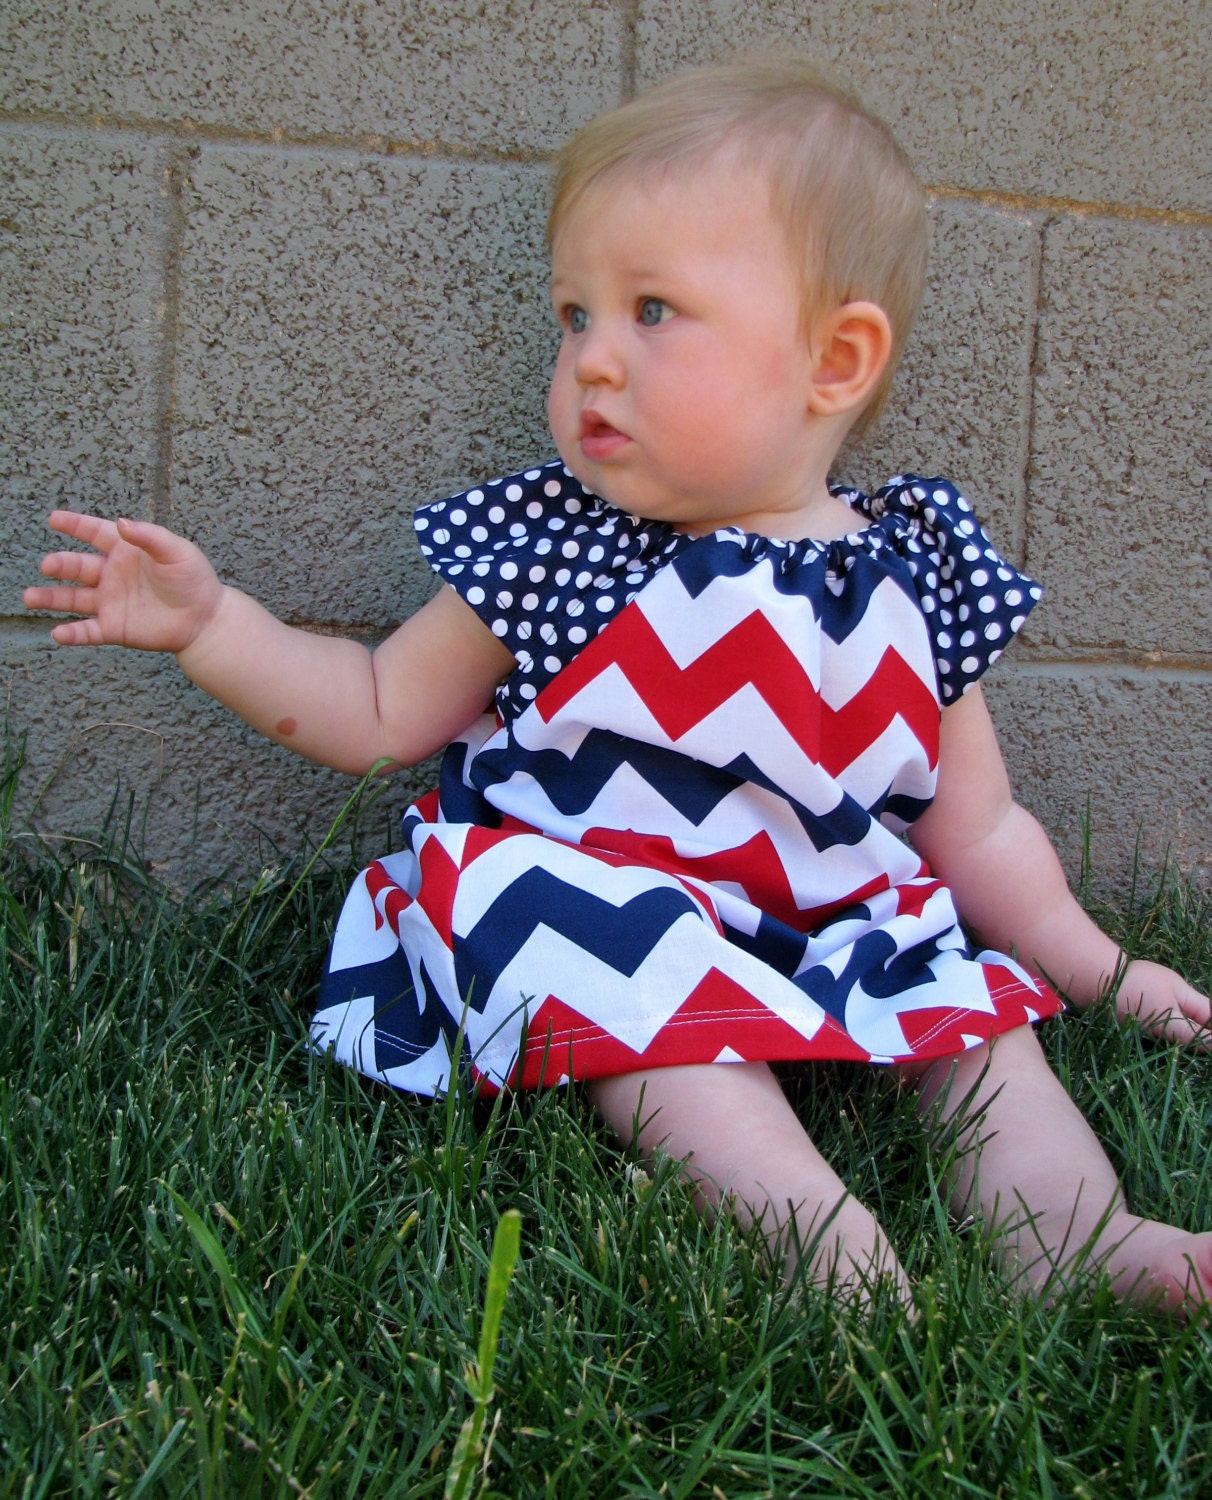 Dress - 4th of July chevron zigzag navy red white blue girl baby toddler  0-3 months, 3-6, 6-12, 12-18, 18-24, 2T, 3T 4T 5T nautical